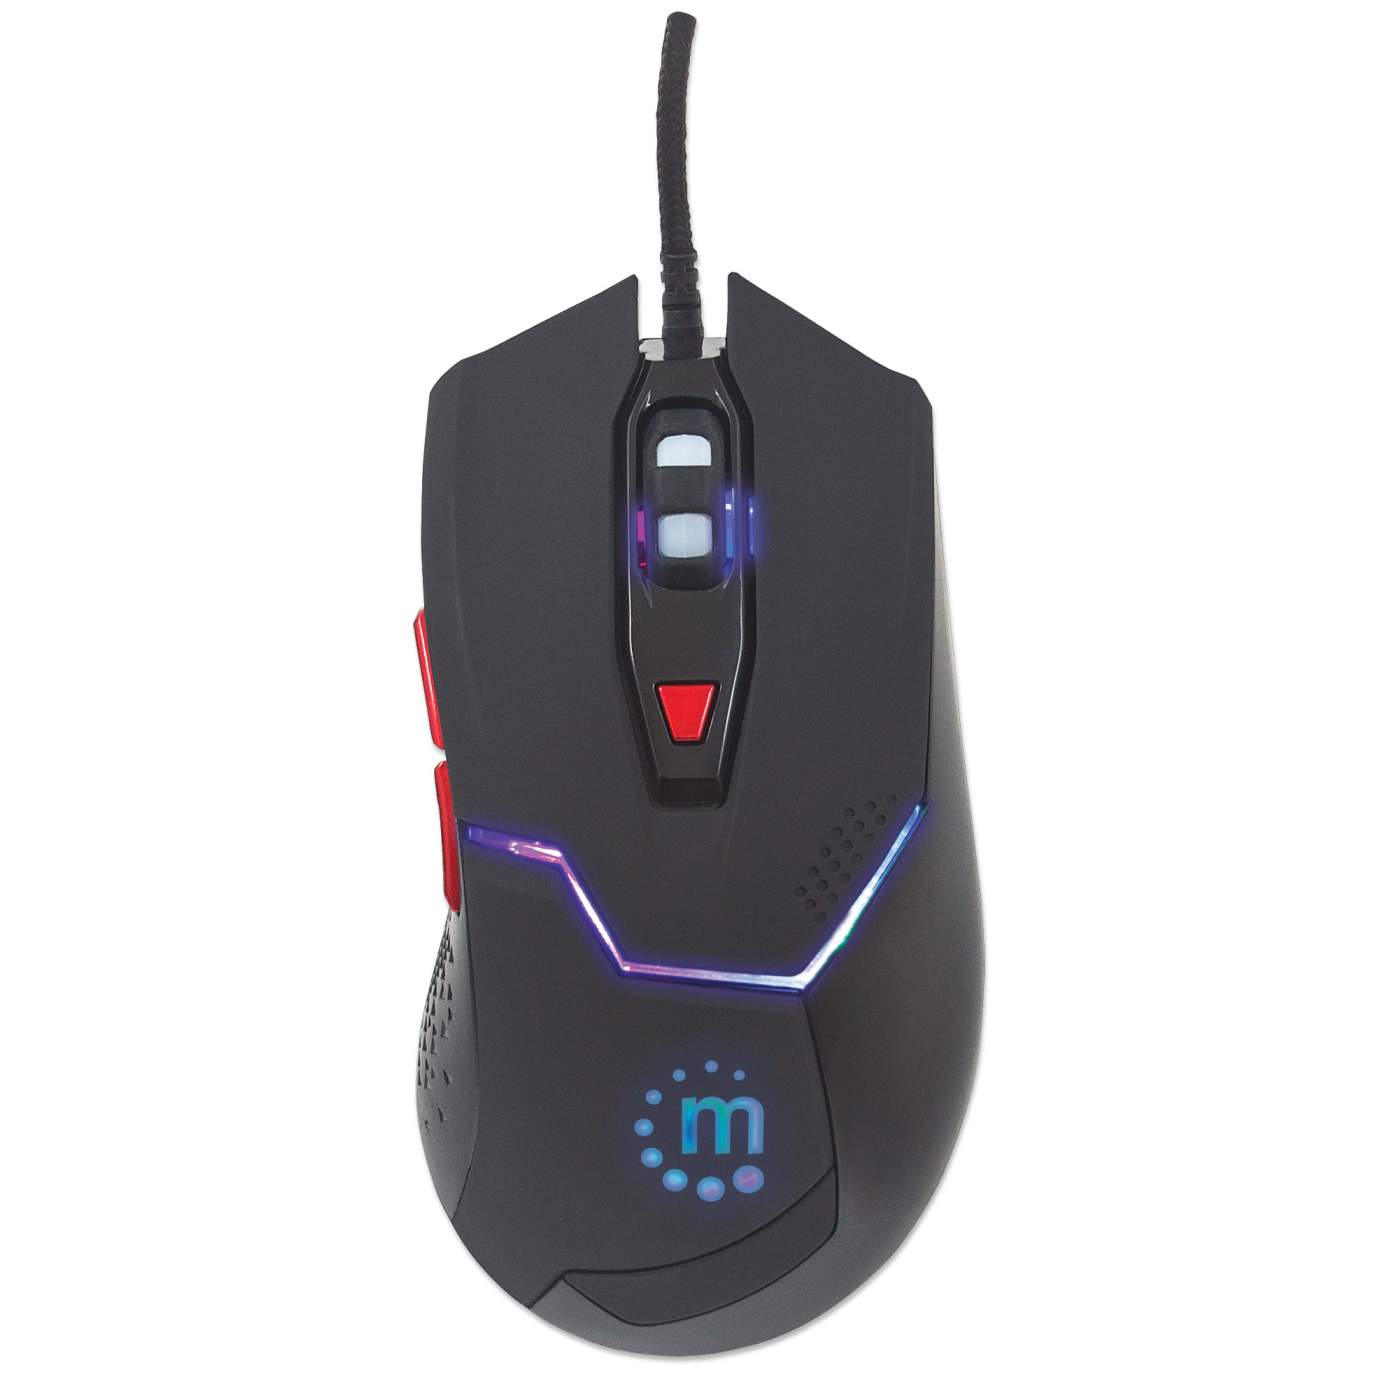 Xiaomi launches Gaming Mouse Lite with RGB lighting for just $ 15